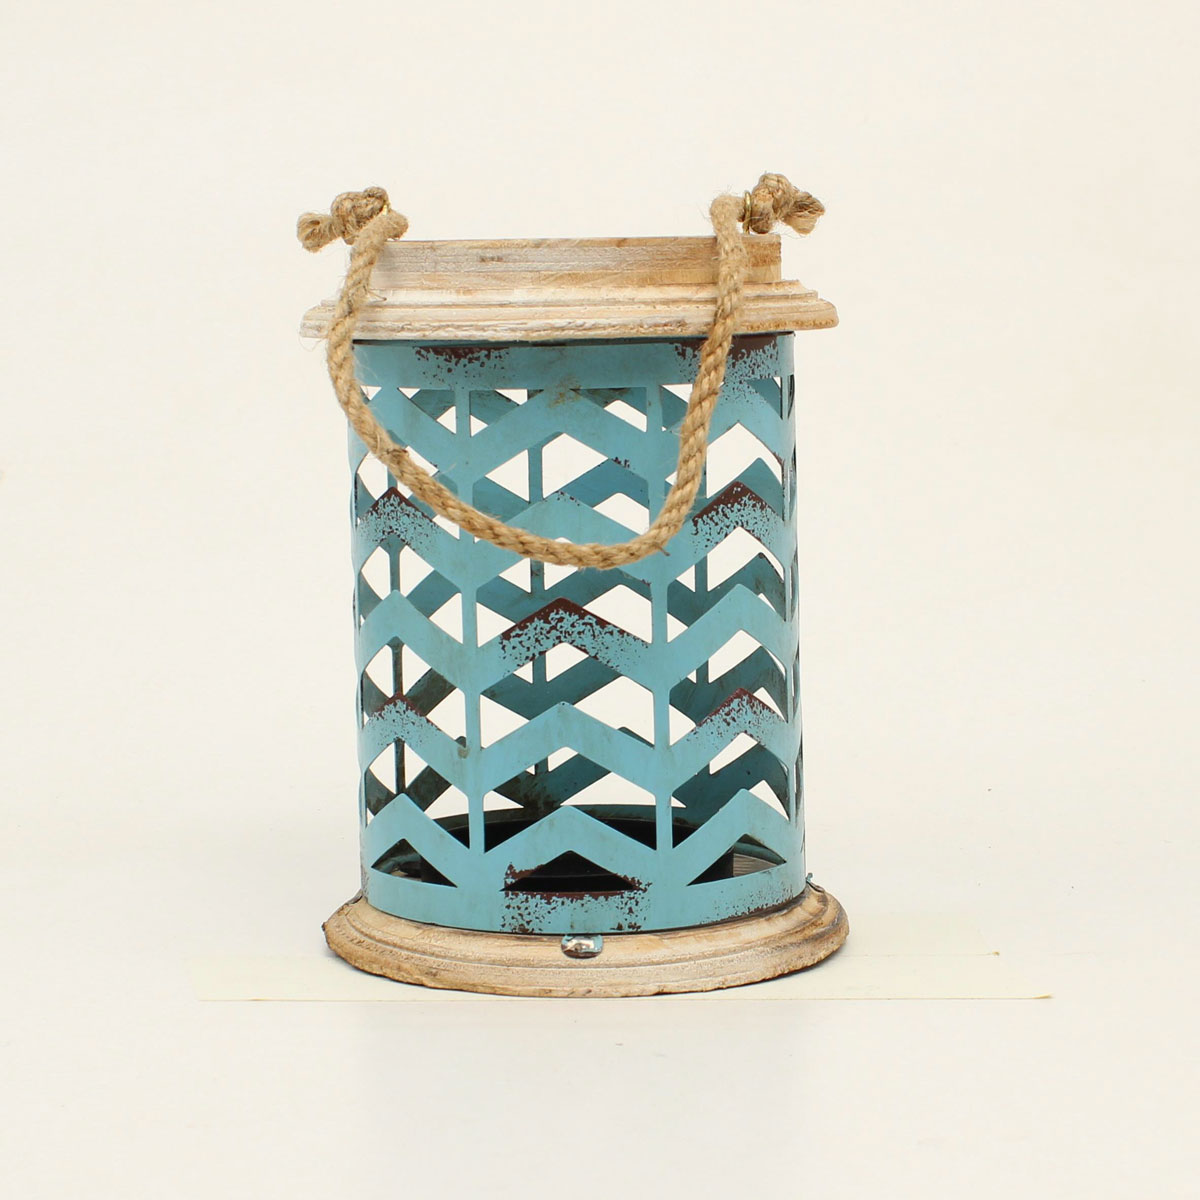 94032 Distressed Metal Chevron Candle Holder, Turquoise - 7 X 5.25 In.